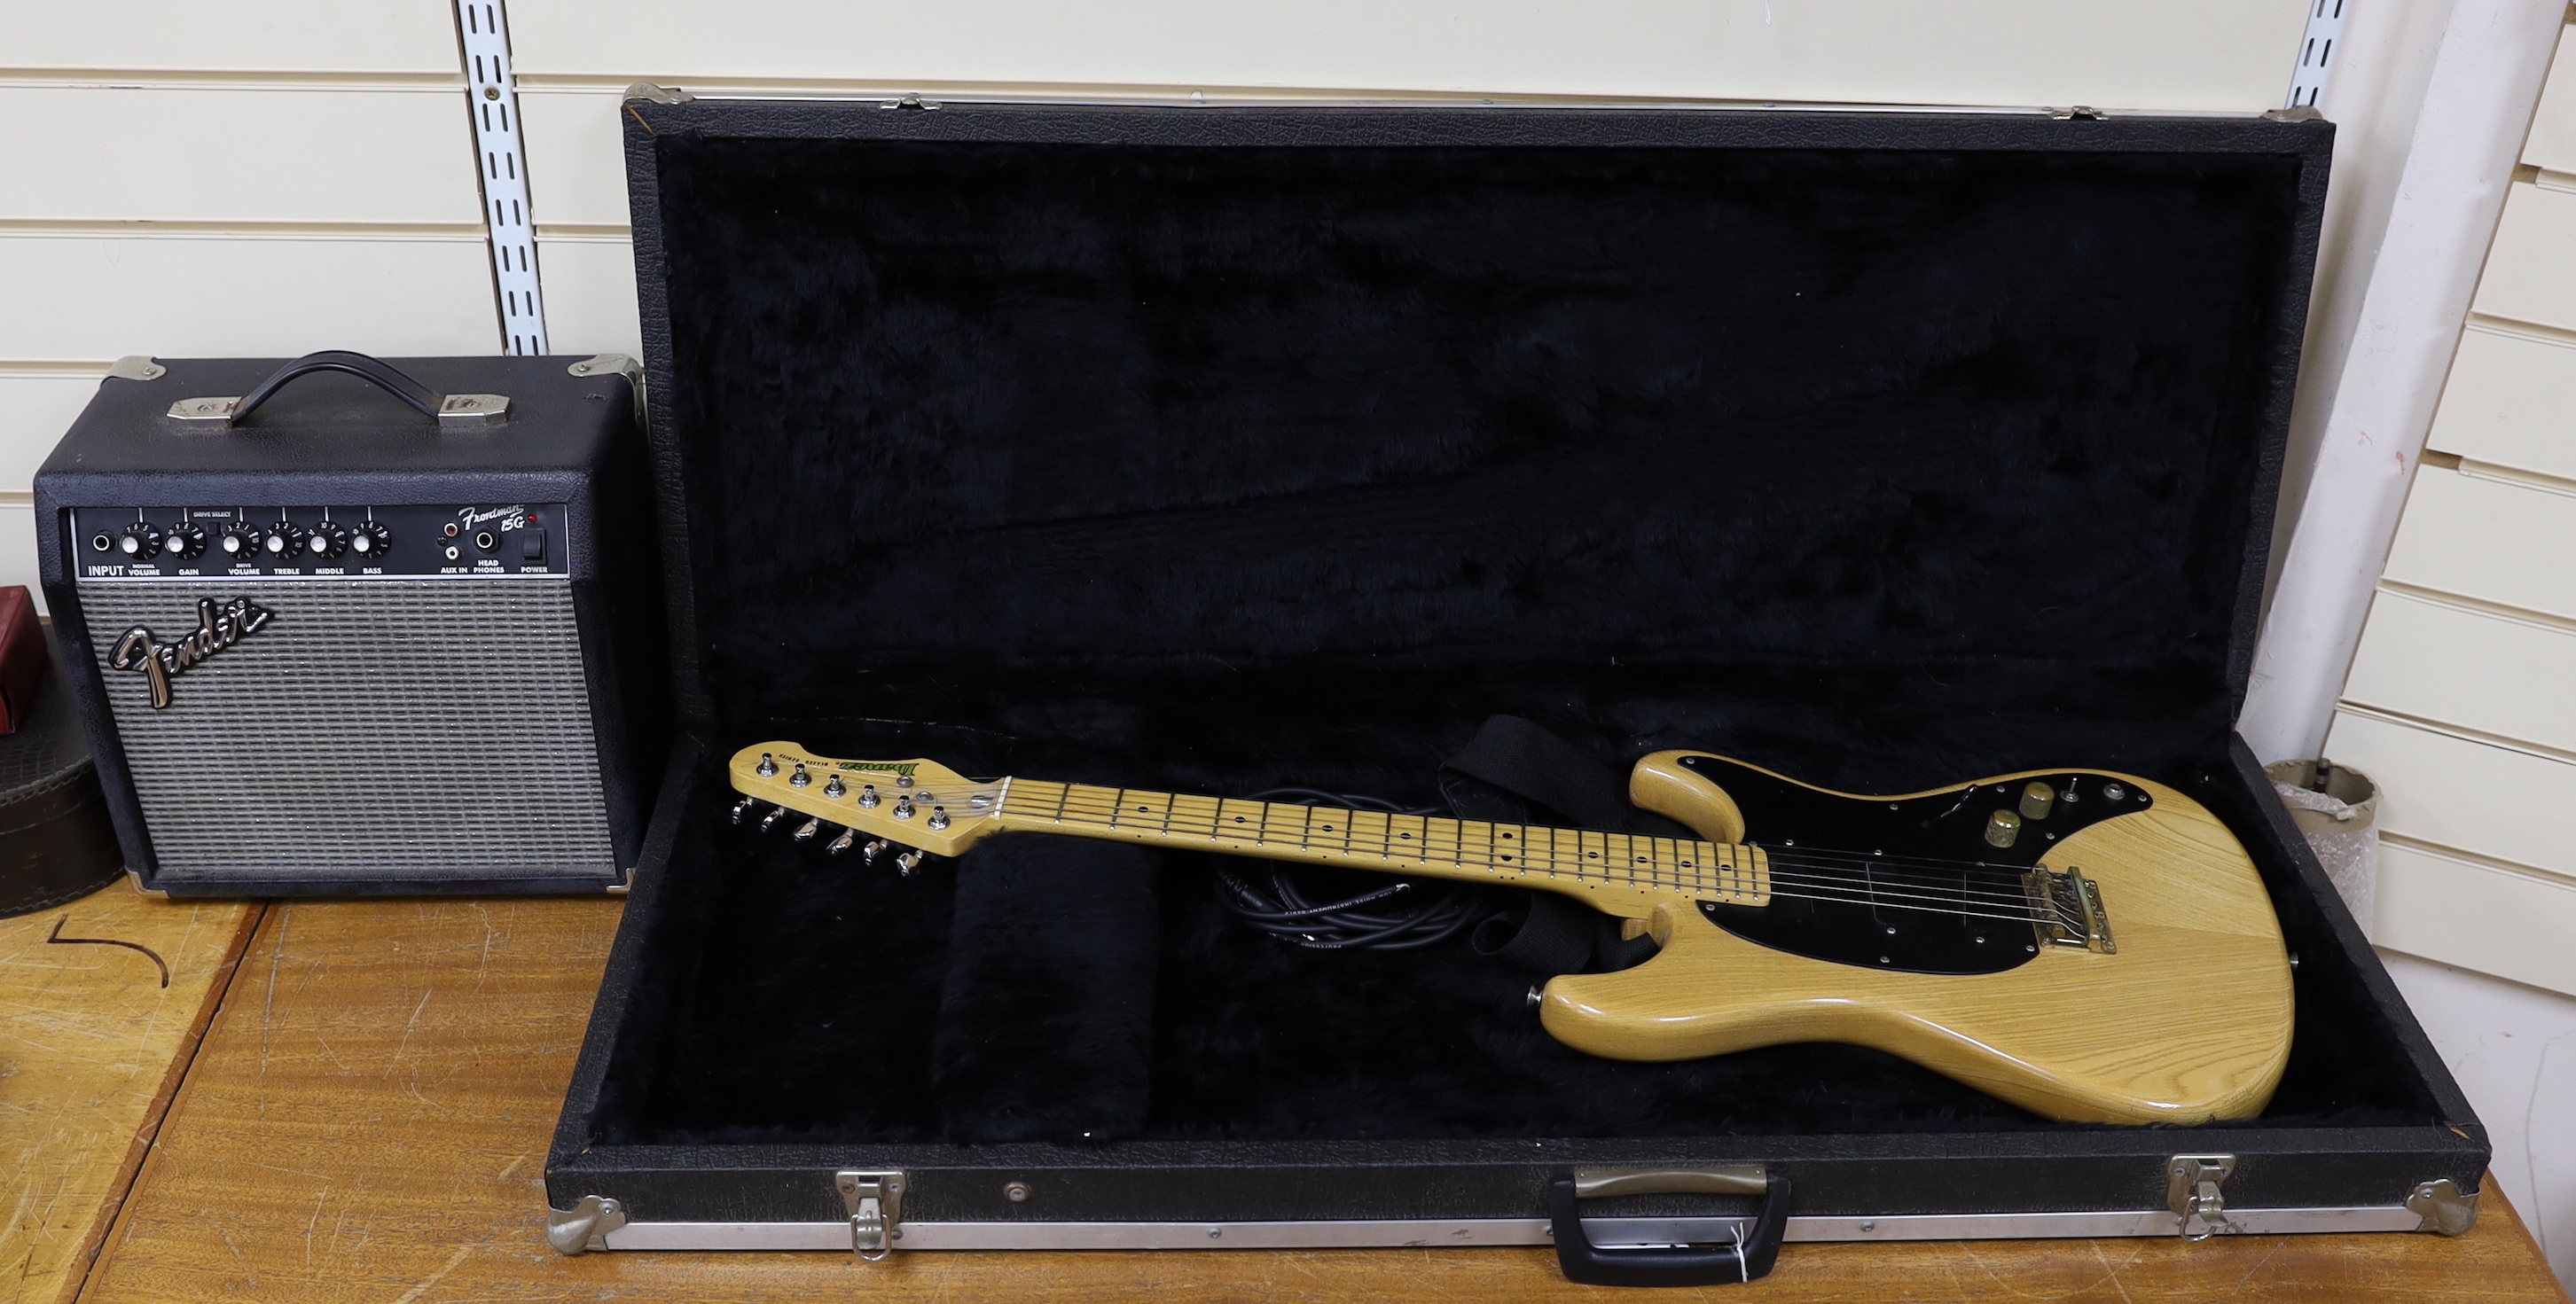 A 1980 Electric guitar by Ibanez, Japan, Blazer Series in natural finish with flight case and a small Fender Frontman 15G amp